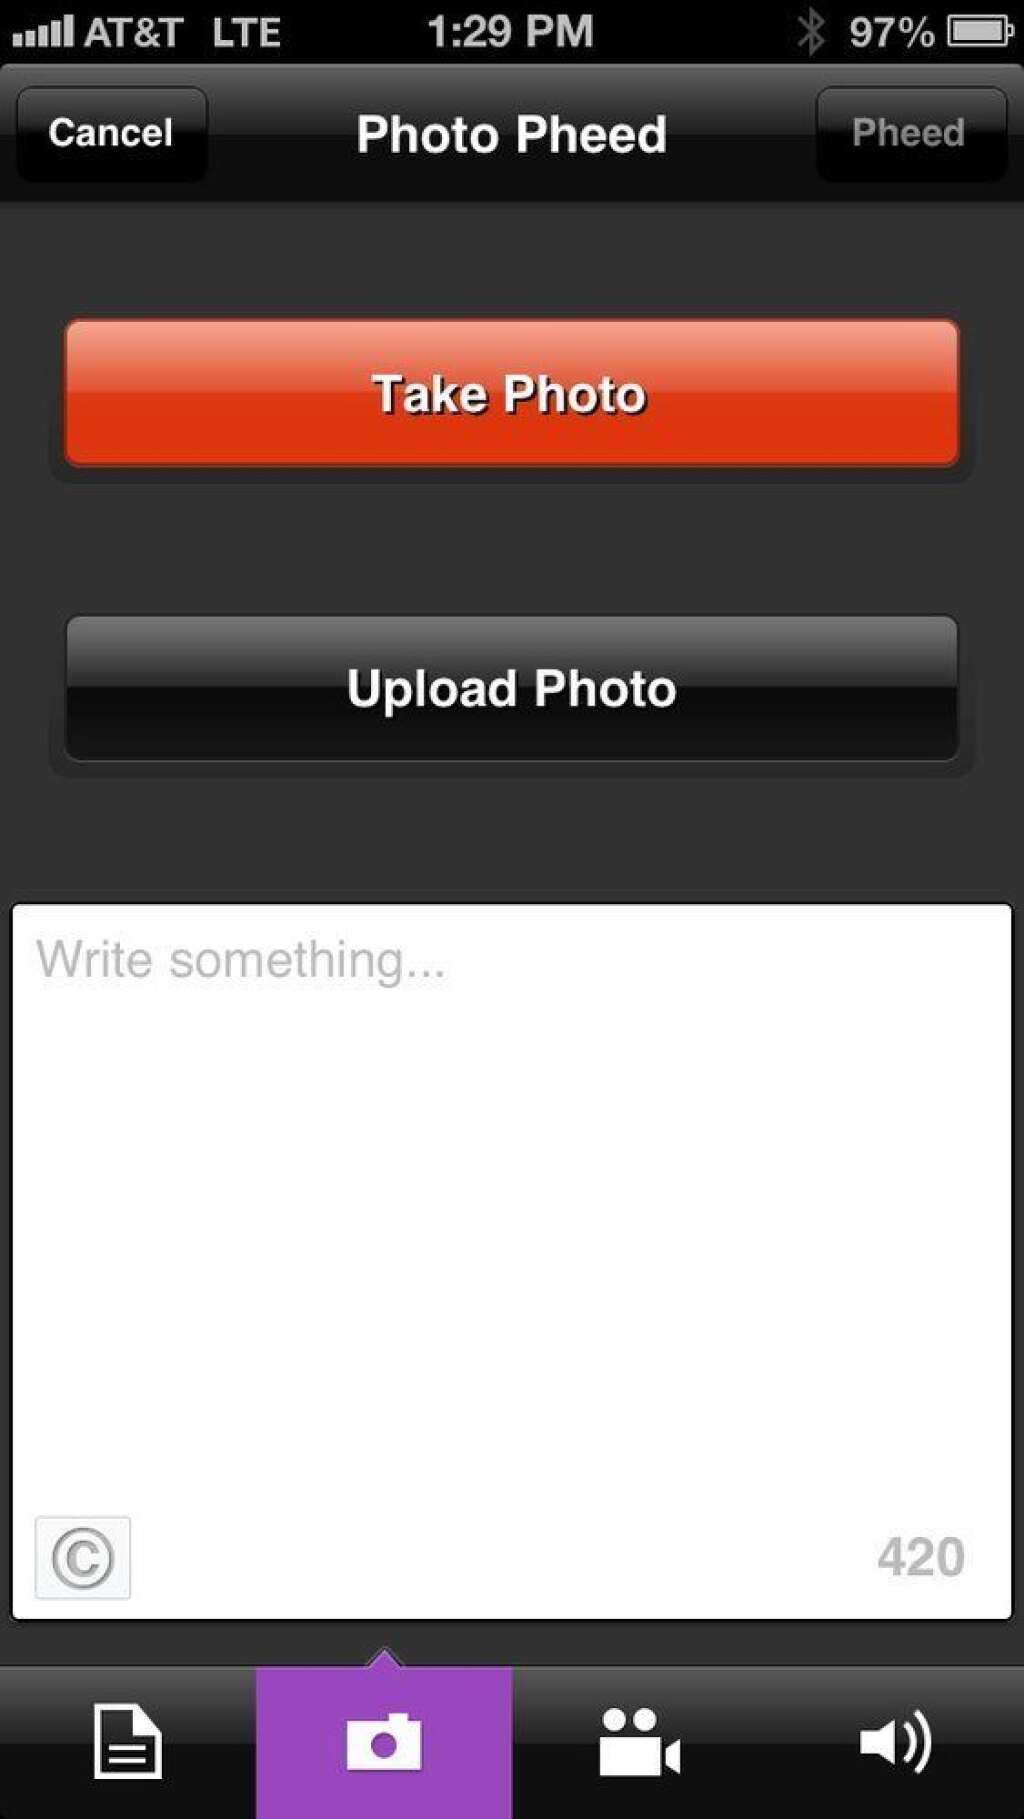 Photo Pheed - You can quickly and easily upload a photo to Pheed with this screen, and give it a caption.